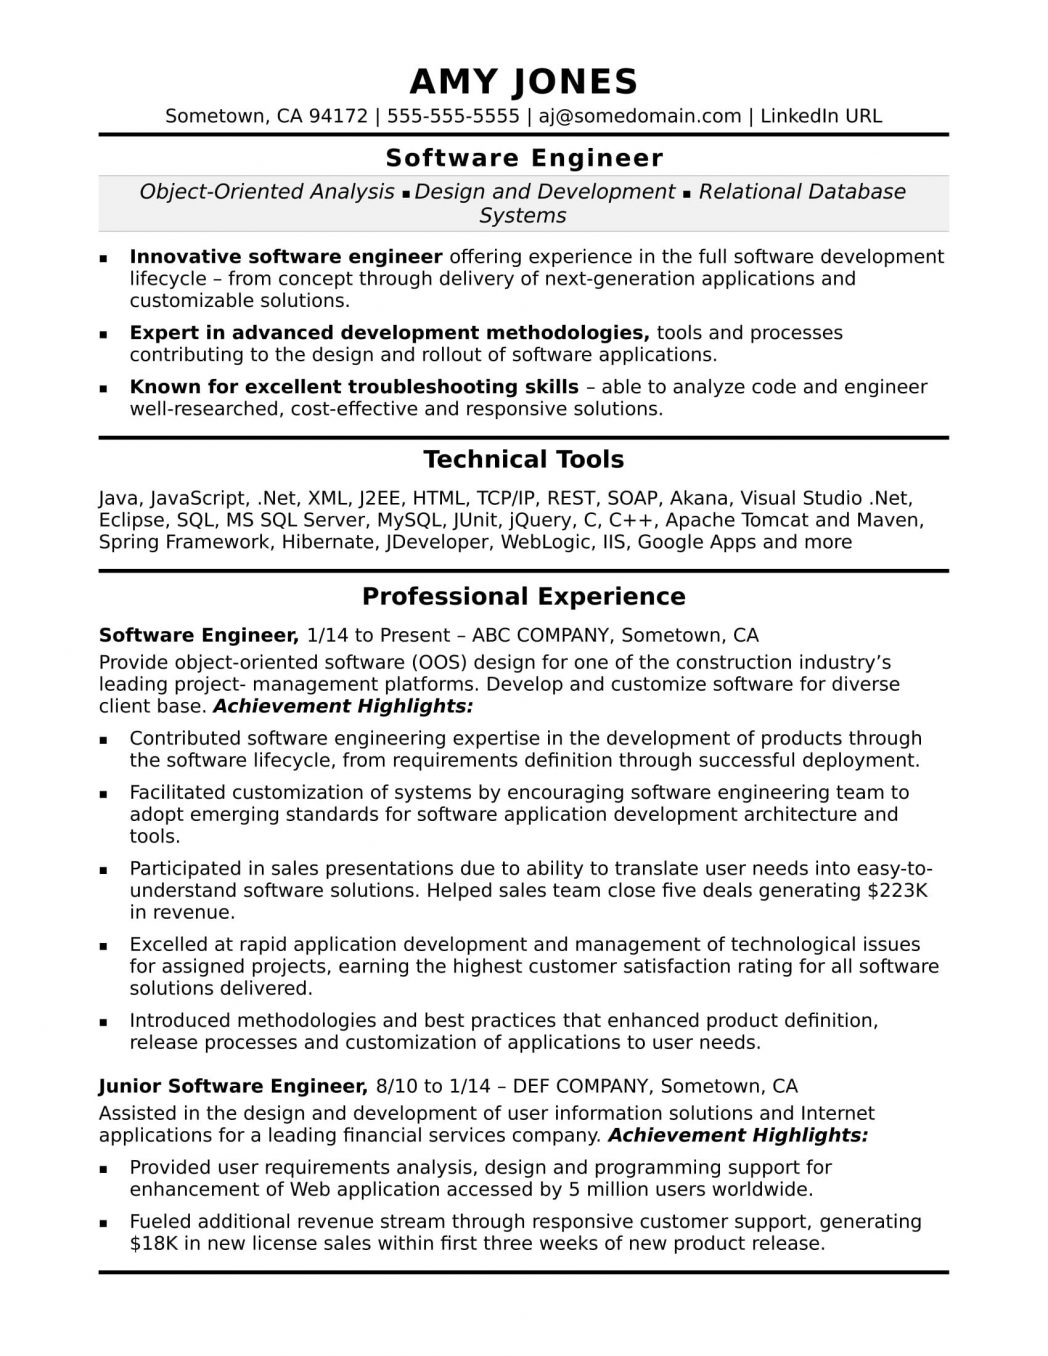 Good Objective For Resume Software Engineer 3 Format Good Examples Of D73f1b95c47ab0b0f1ca48da5375693a For Students Objective Statements Sample High Example Customer Service With No Experience Object good objective for resume|wikiresume.com